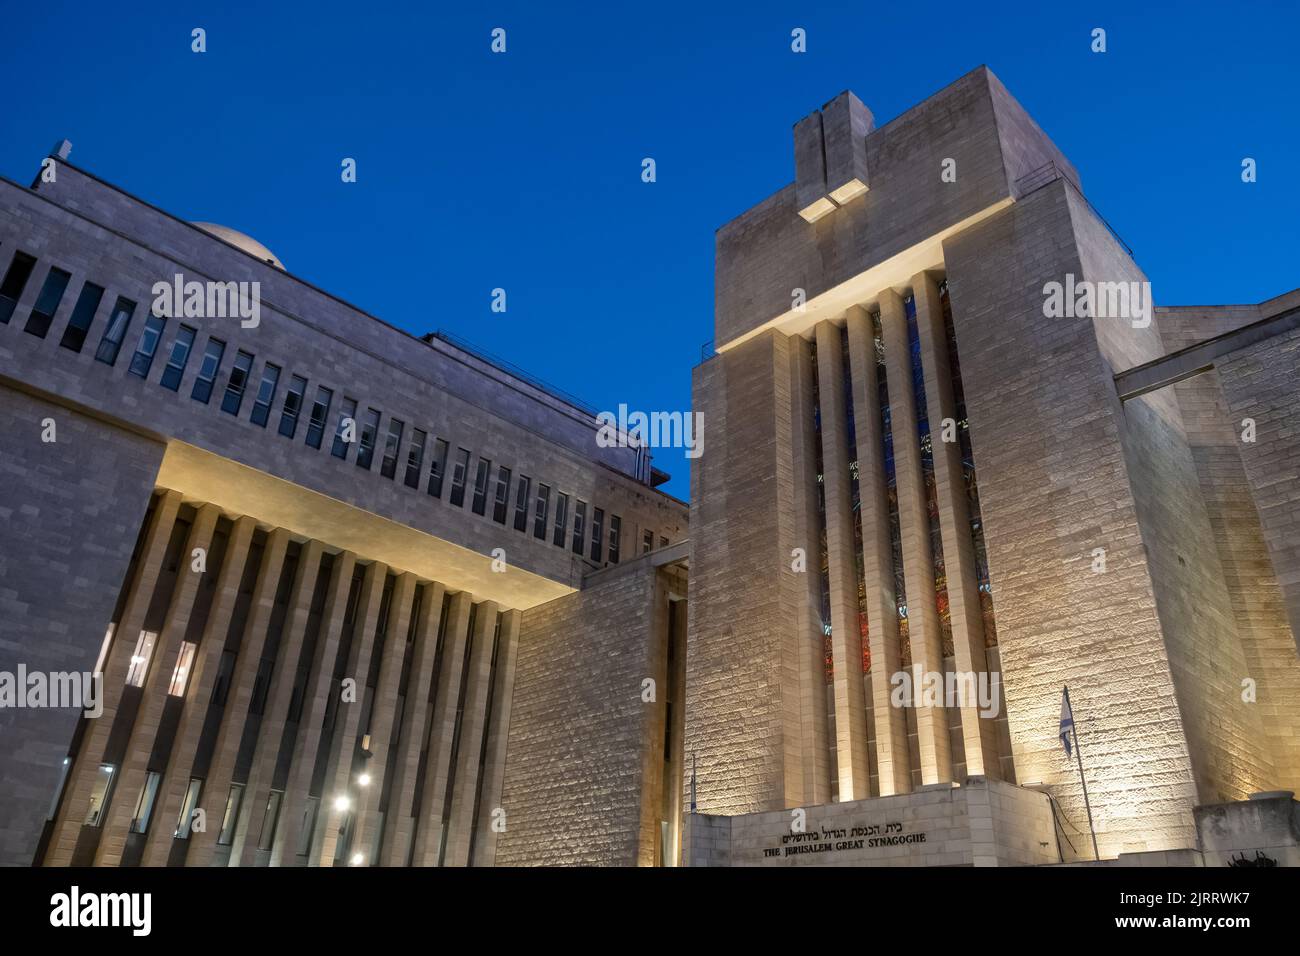 View at twilight of the Great Synagogue of Jerusalem located adjacent to Heichal Shlomo the former seat of the Chief Rabbinate of Israel on 56 King George Street, West Jerusalem, Israel Stock Photo